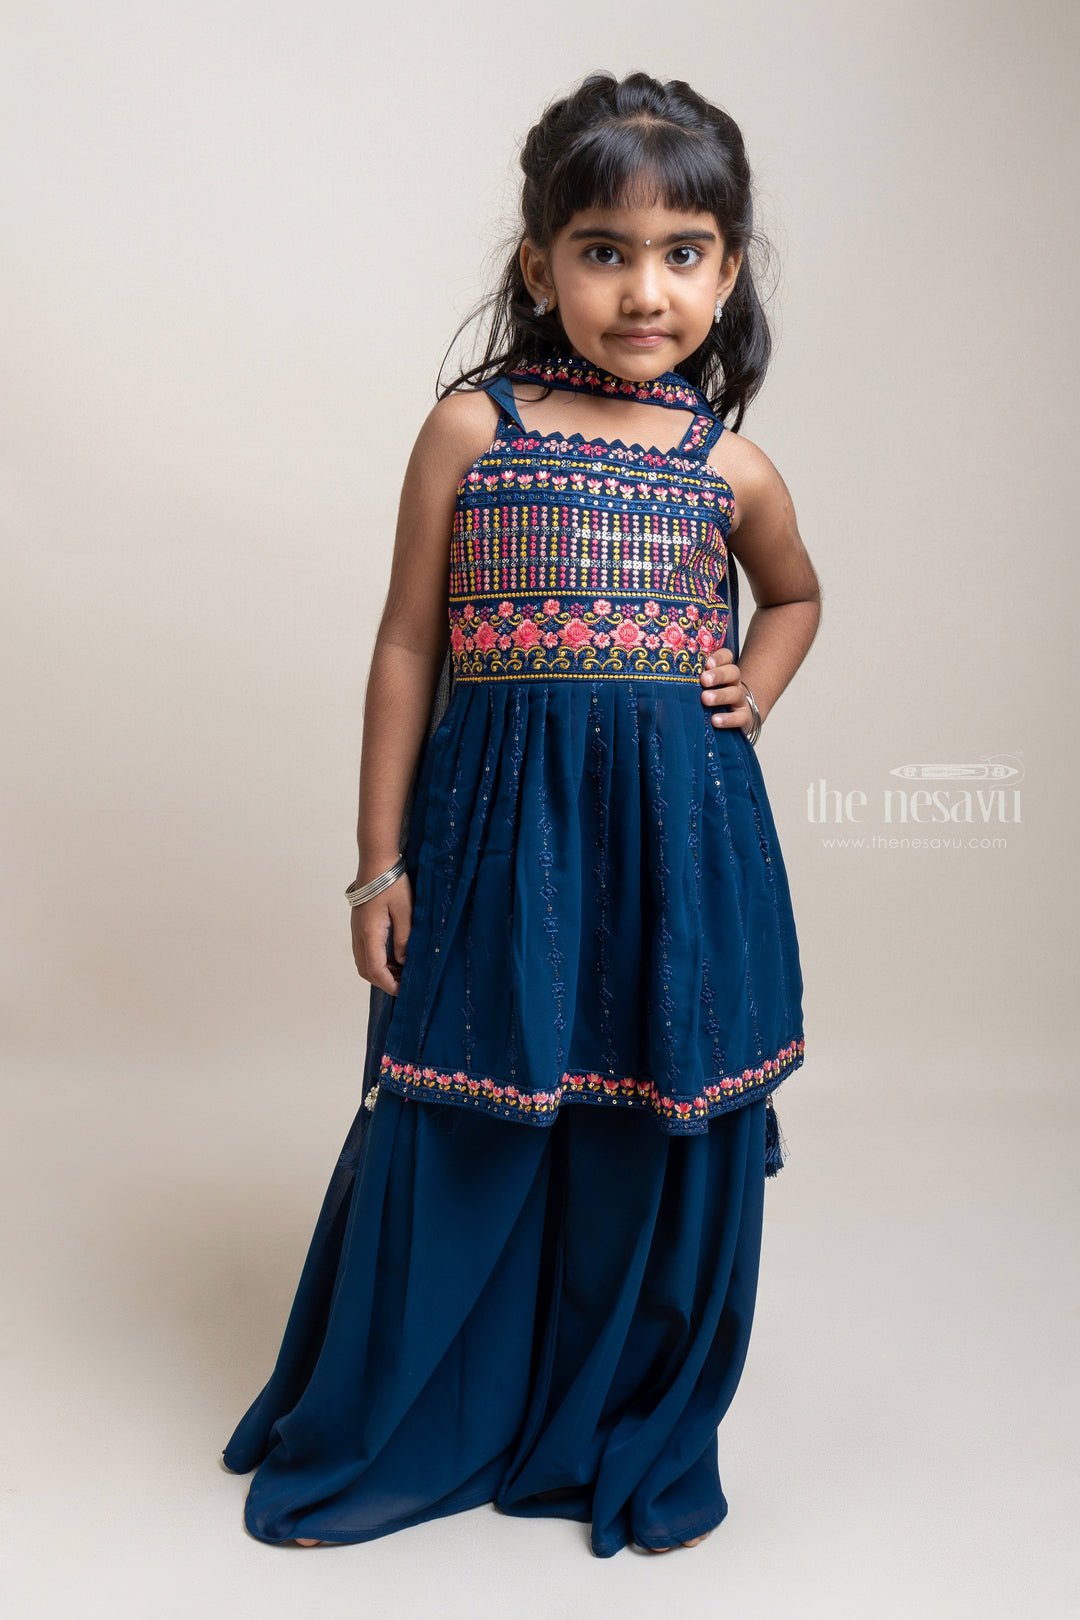 The Nesavu Girls Sharara / Plazo Set Beautiful Navy Blue Floral Embroidery Top And Solid Palazzo Suit for Girls Nesavu 16 (1Y) / Blue GPS131A-16 Premium Embroidery Top For Girls | Ethnic Wear For Girls | The Nesavu